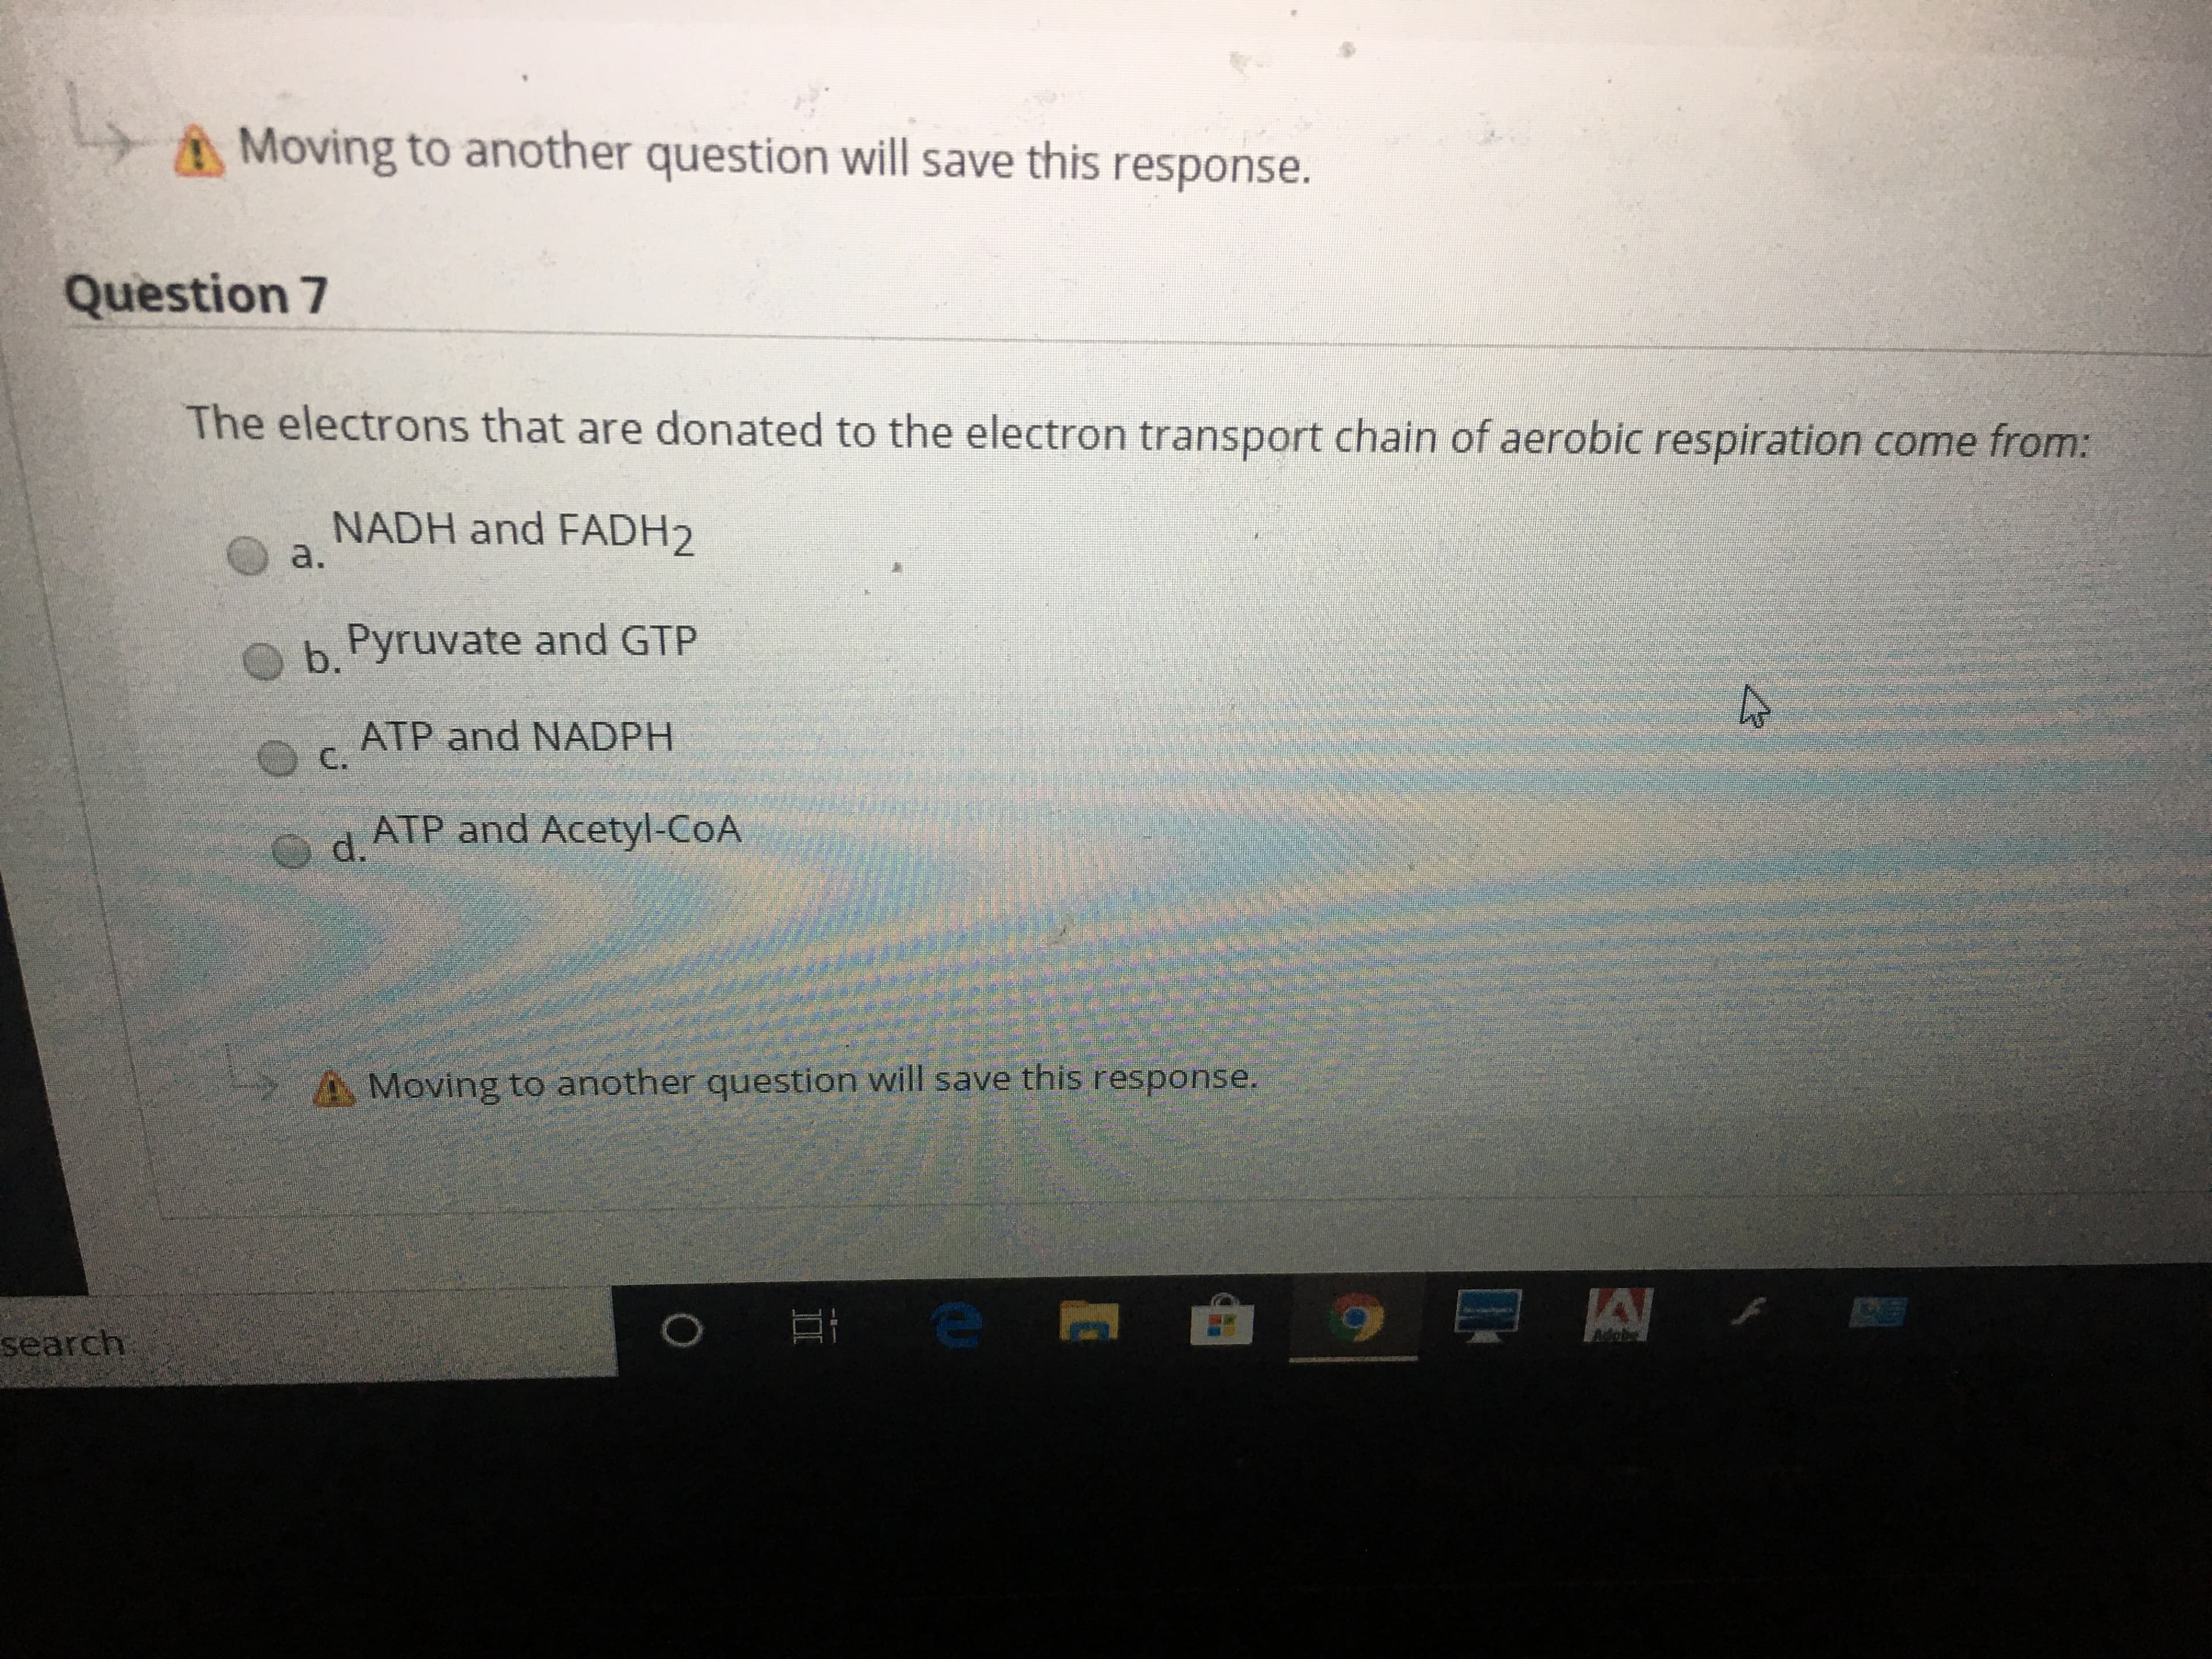 Moving to another question will save this response.
Question 7
The electrons that are donated to the electron transport chain of aerobic respiration come from:
NADH and FADH2
a.
b.
Pyruvate and GTP
ATP and NADPH
C.
ATP and Acetyl-CoA
Od.
A Moving to another question will save this response.
search
II
